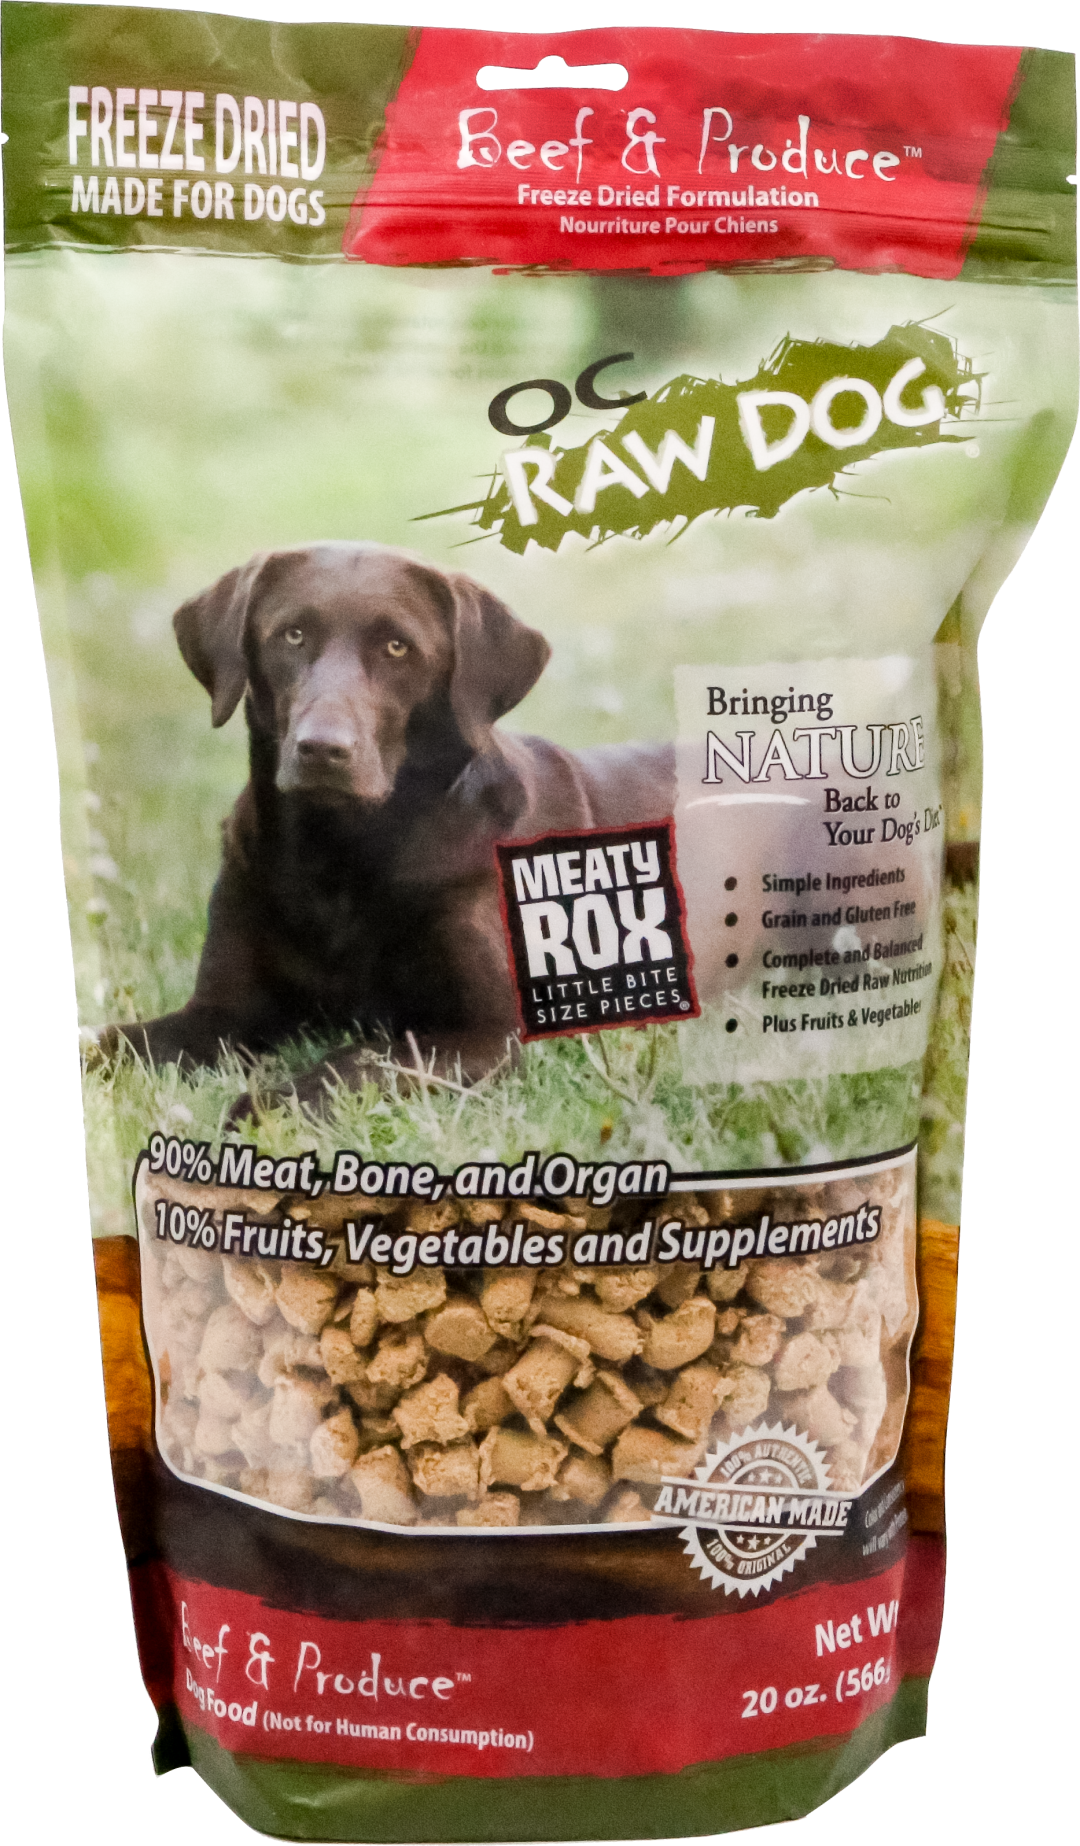 OC Raw Freeze Dried Beef and Produce 20oz - Paws Choose Us